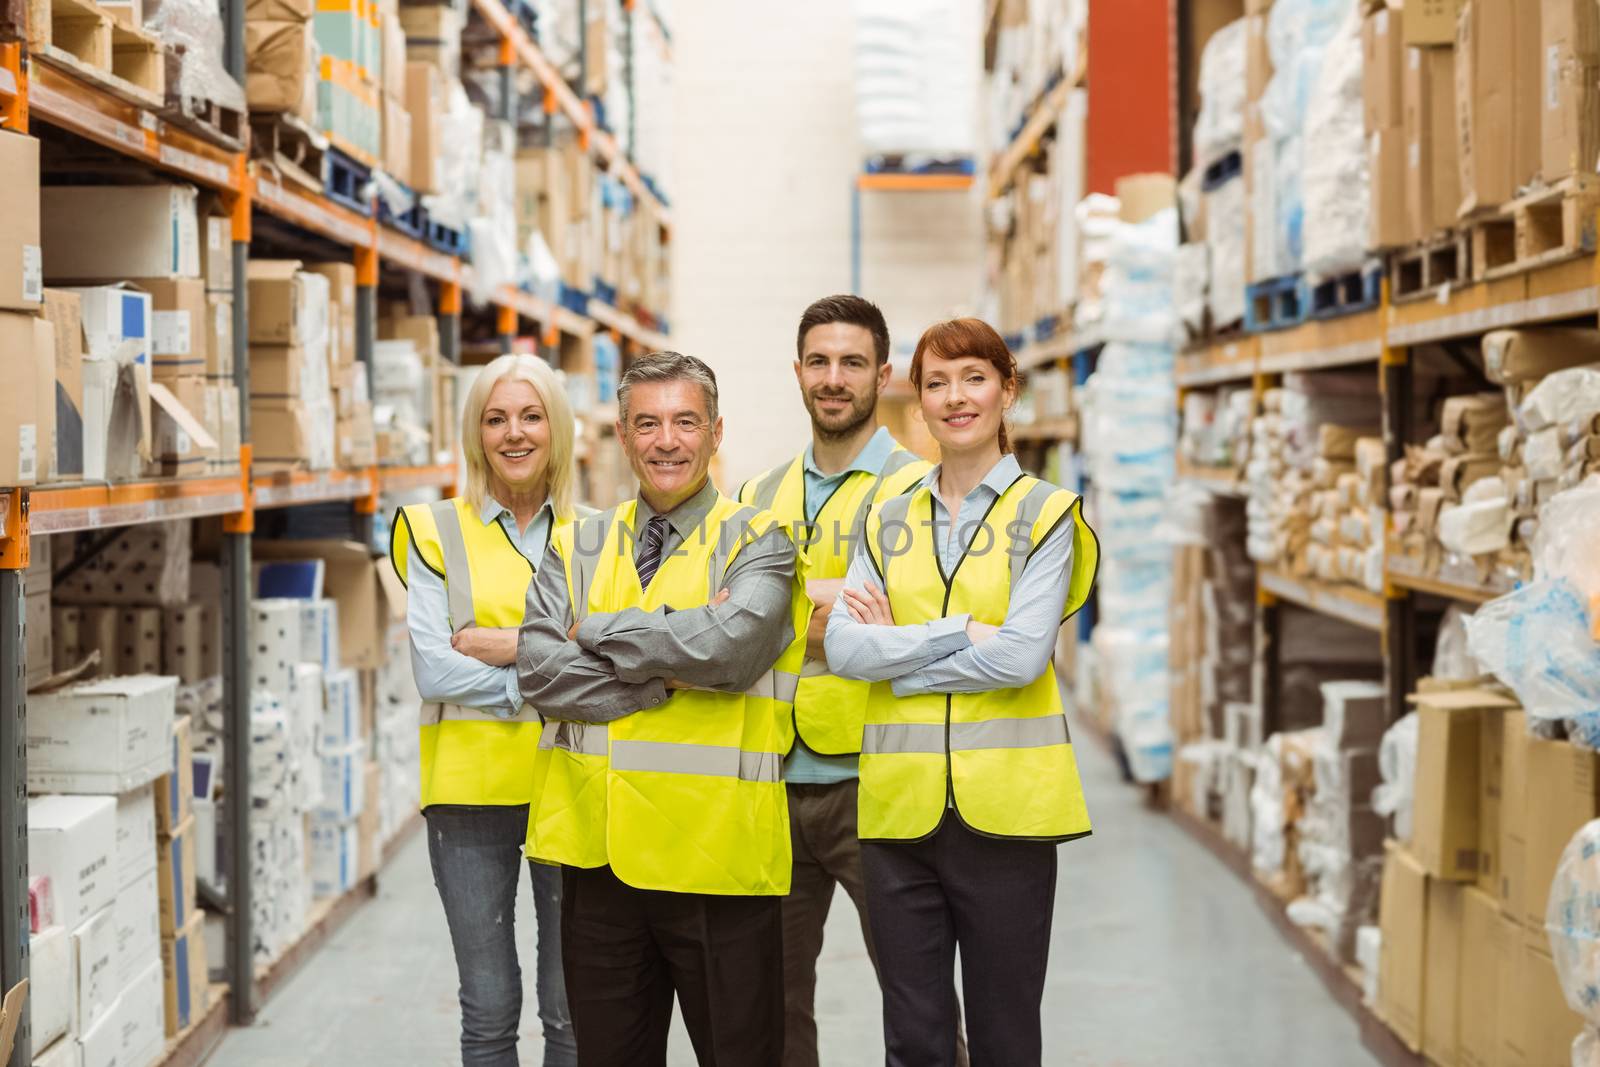 Smiling warehouse team with arms crossed in a large warehouse